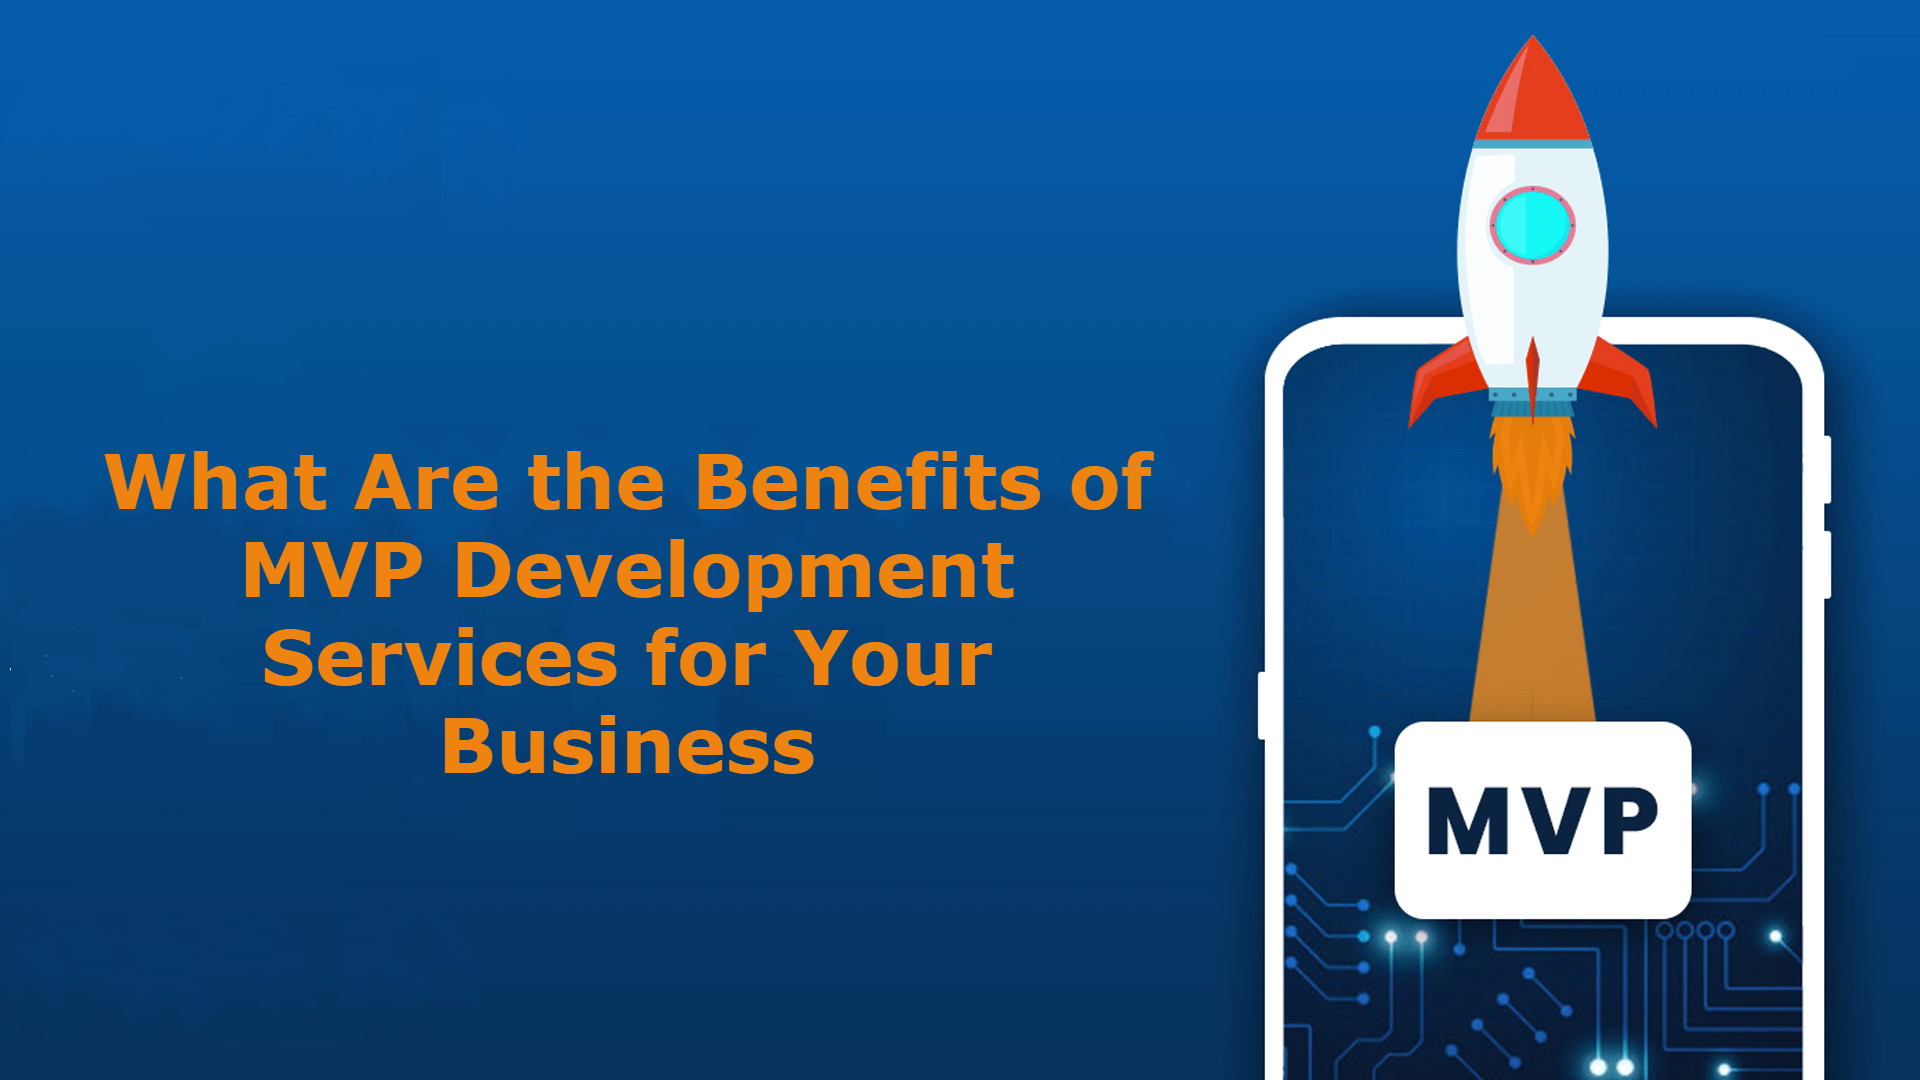 What Are the Benefits of MVP Development Services for Your Business